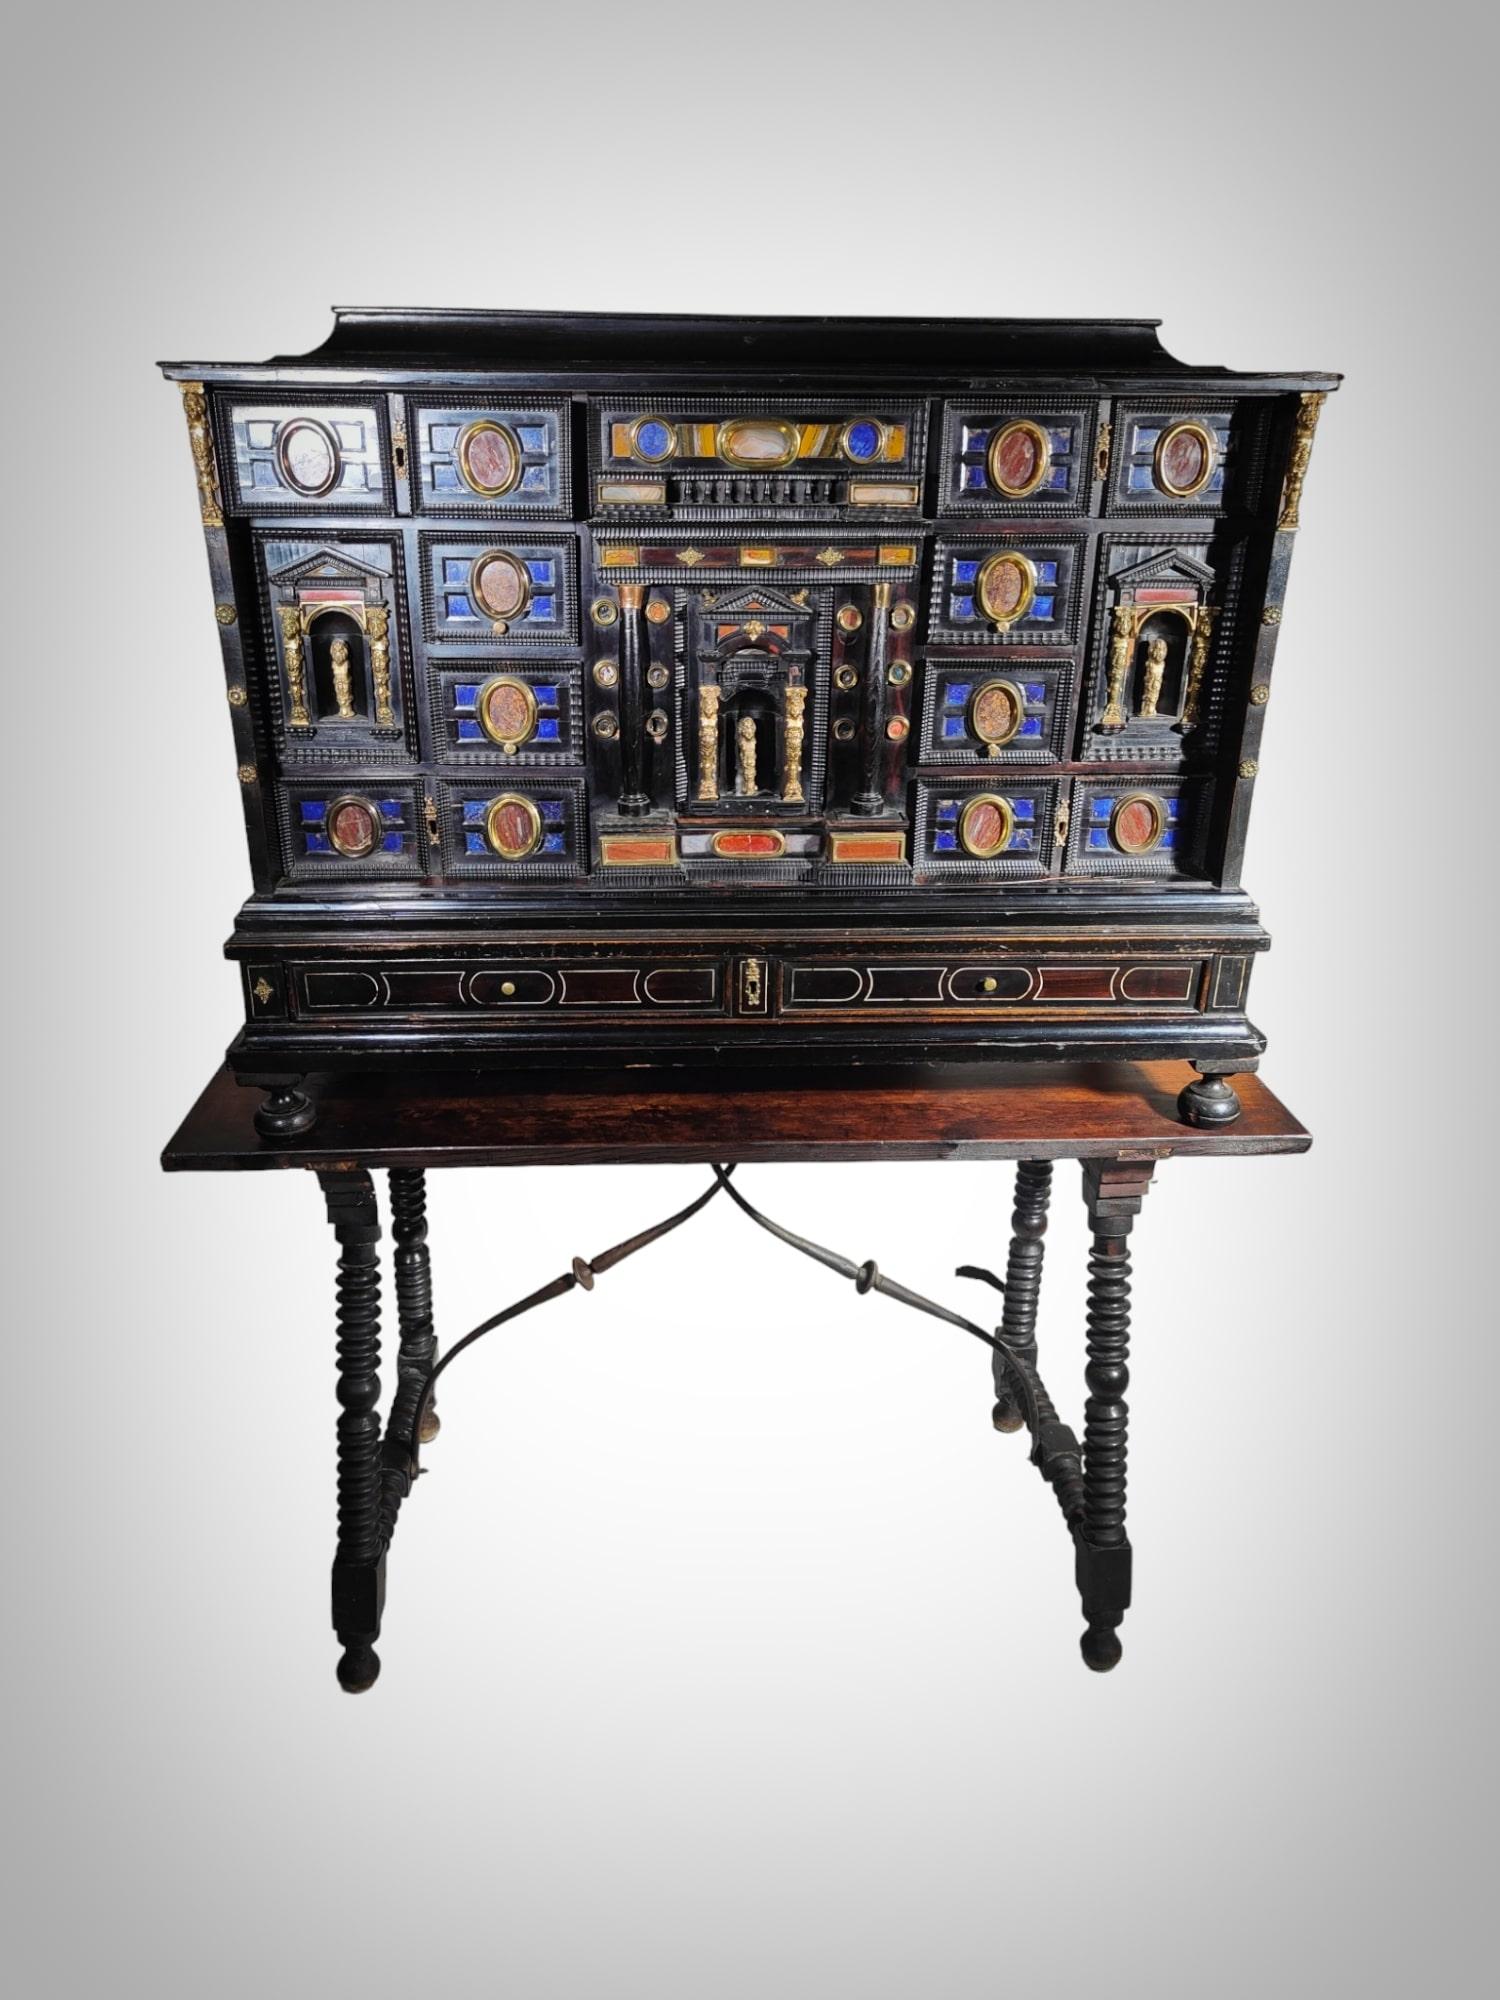 Step into the opulent world of the Italian Baroque era with this extraordinary 17th-century cabinet. Meticulously crafted with unparalleled artistry, this ebony and ebonized cabinet boasts a breakfront architectural design, adorned with the richness